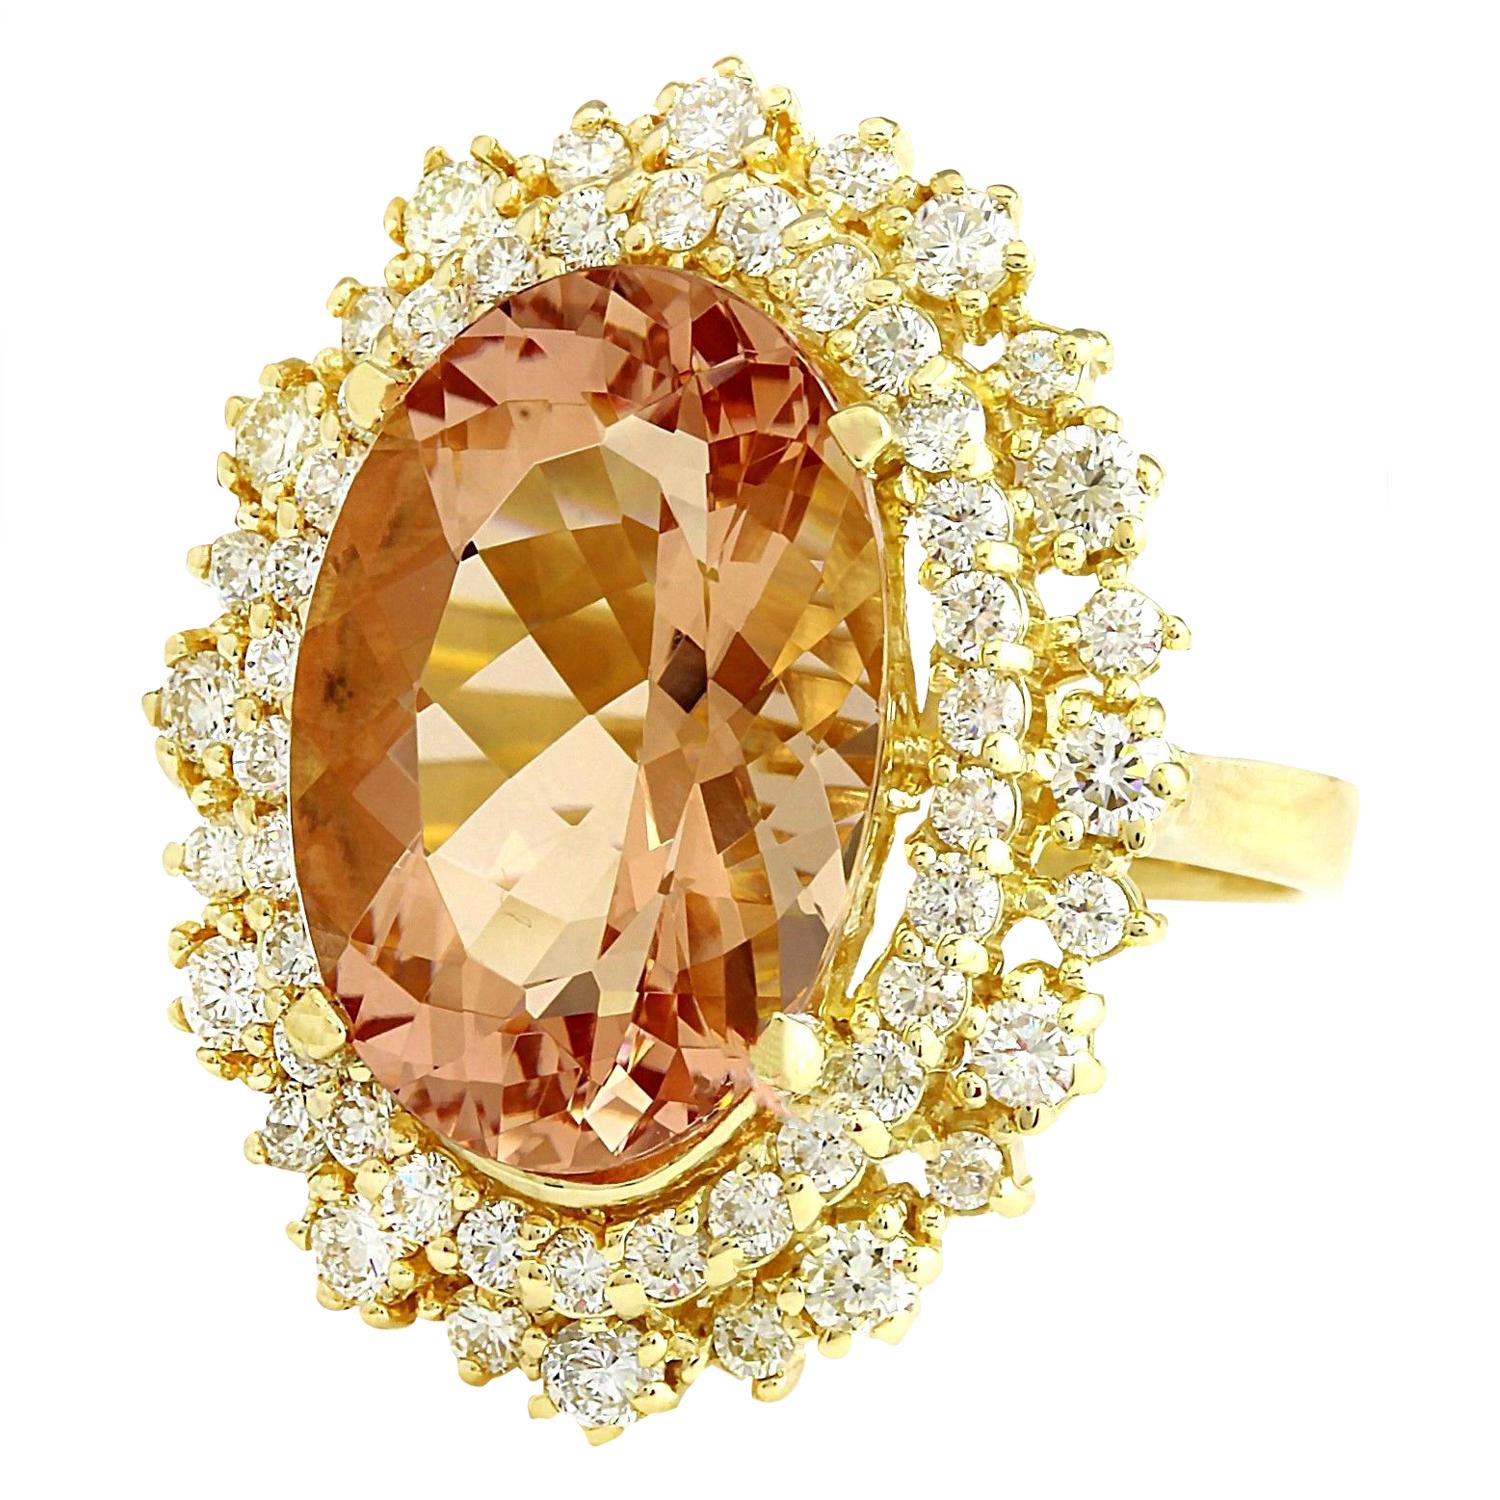 Introducing our stunning 12.40 Carat Natural Morganite 14K Solid Yellow Gold Diamond Ring. Meticulously crafted from luxurious 14K Yellow Gold.
At the center is a captivating oval-shaped morganite, weighing 11.00 carats and measuring 16.00x12.00 mm.